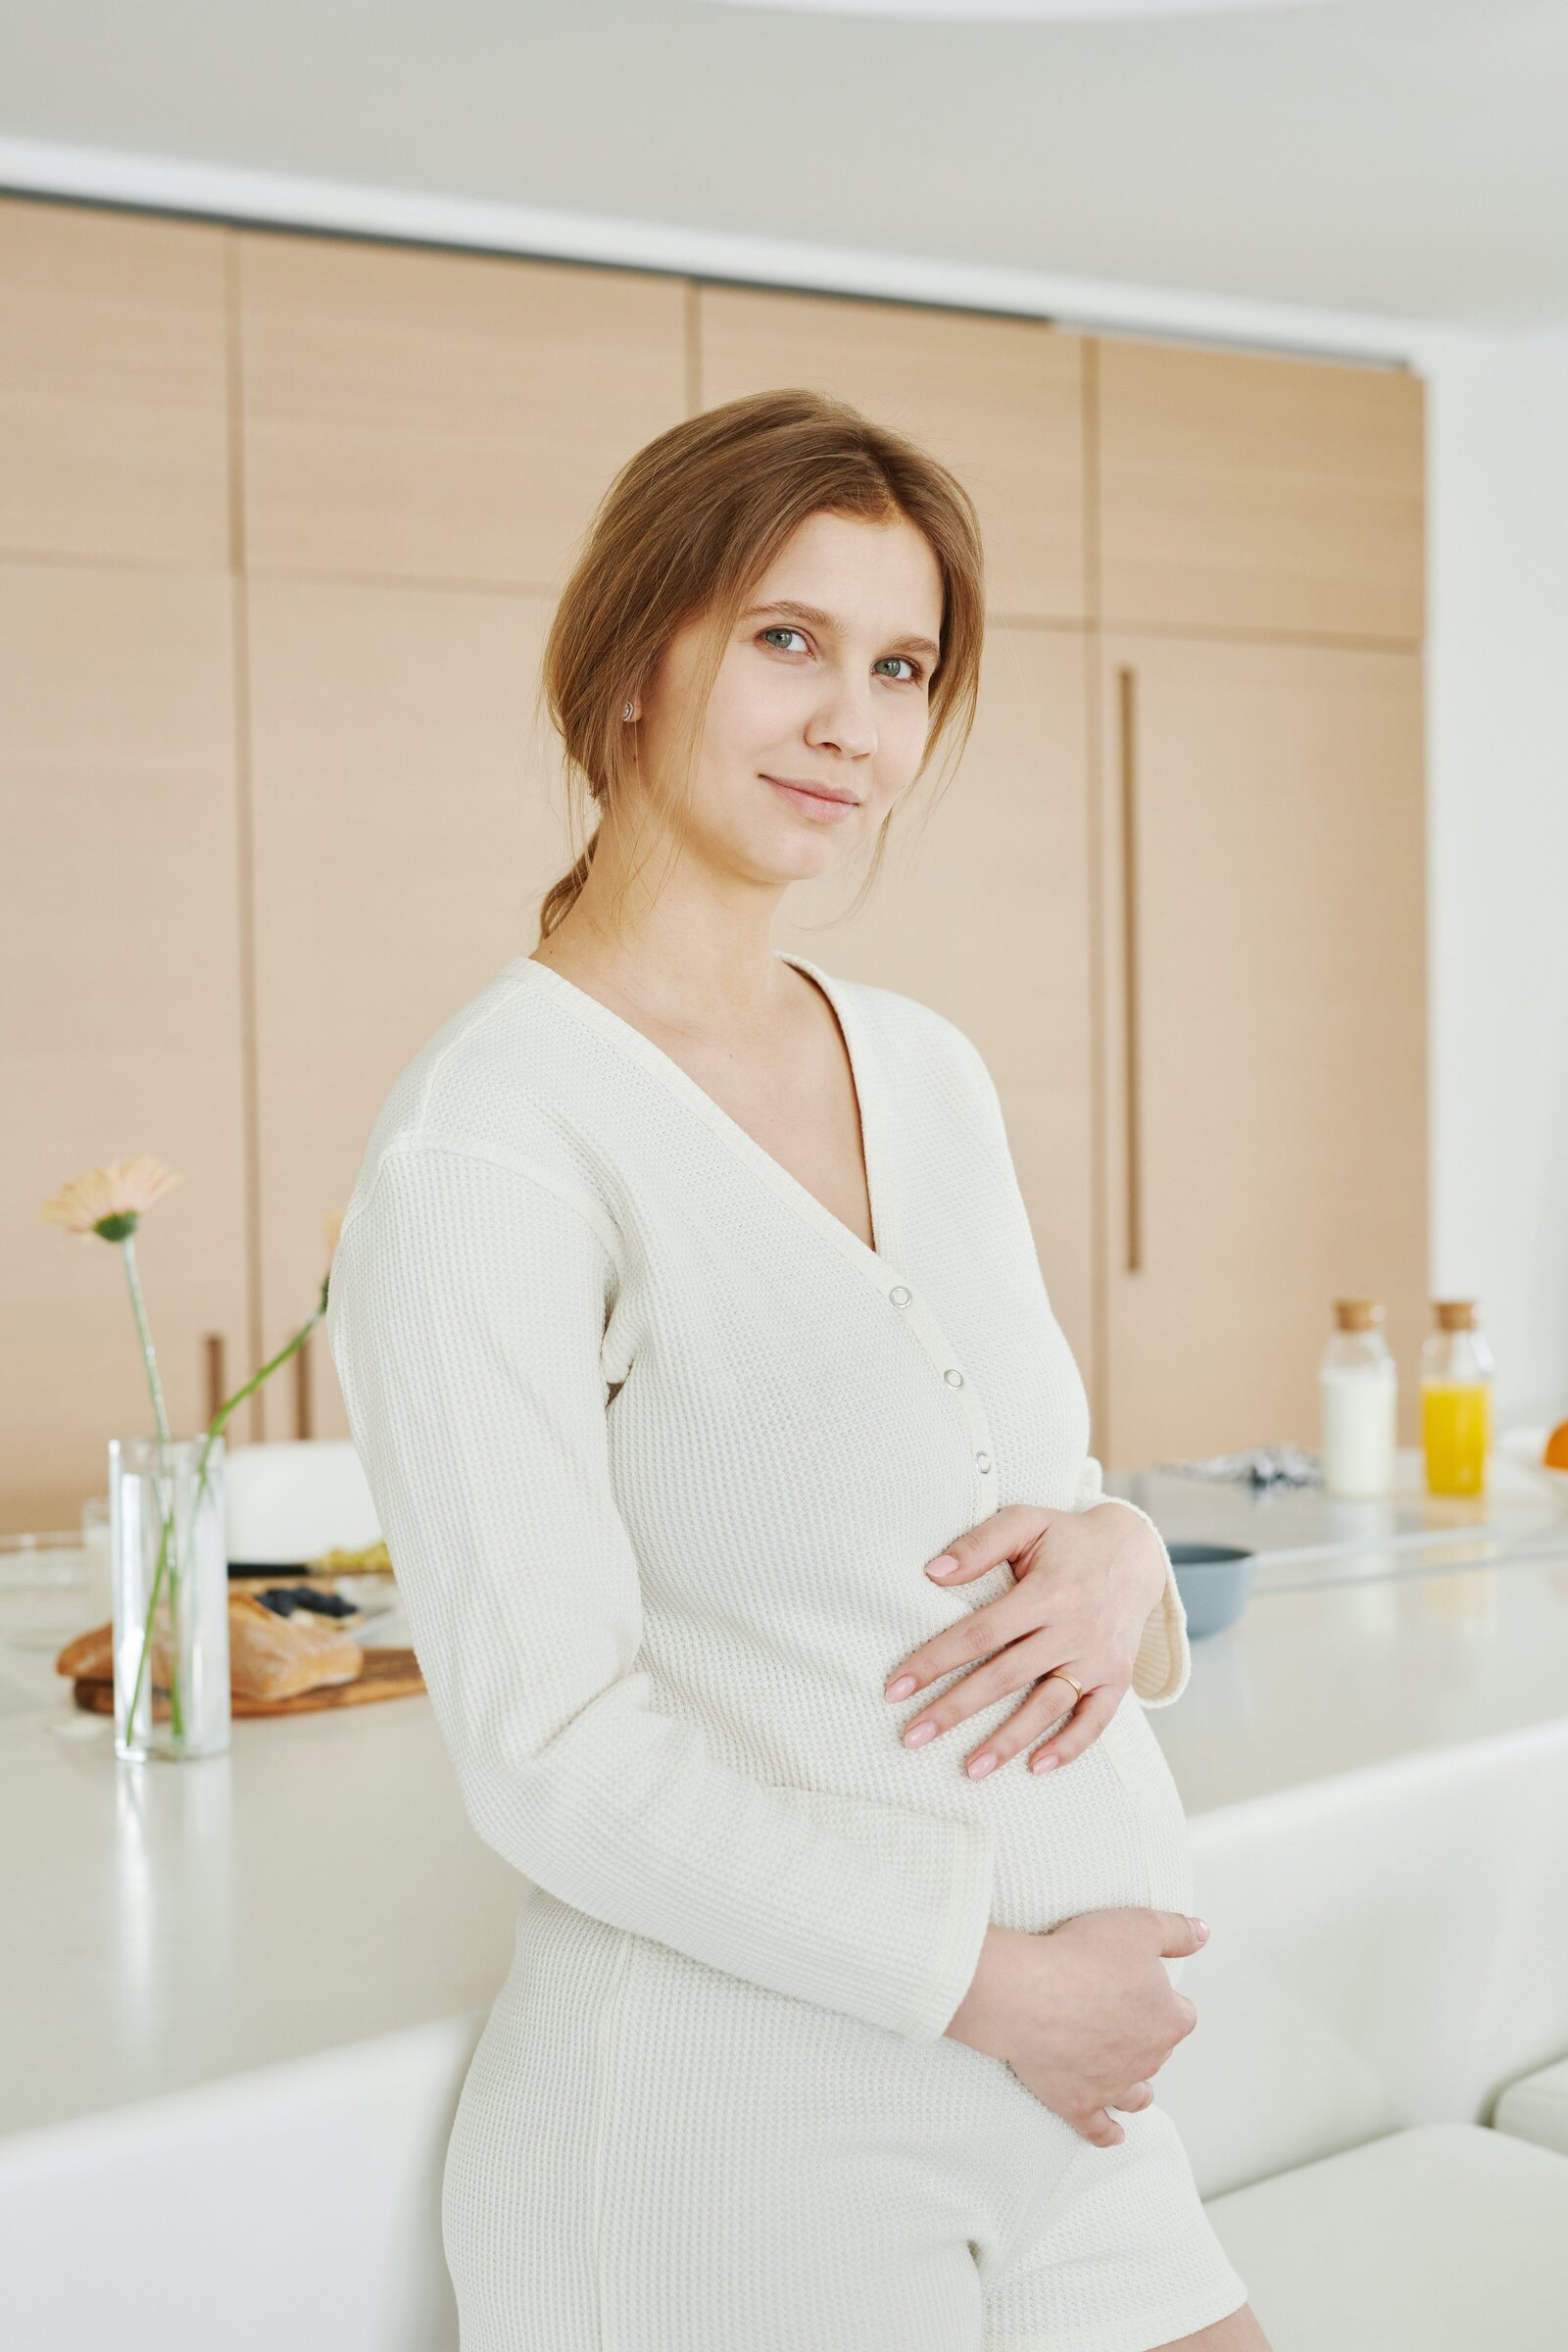 Prengnant woman standing  at kitchen counter holding her belly.